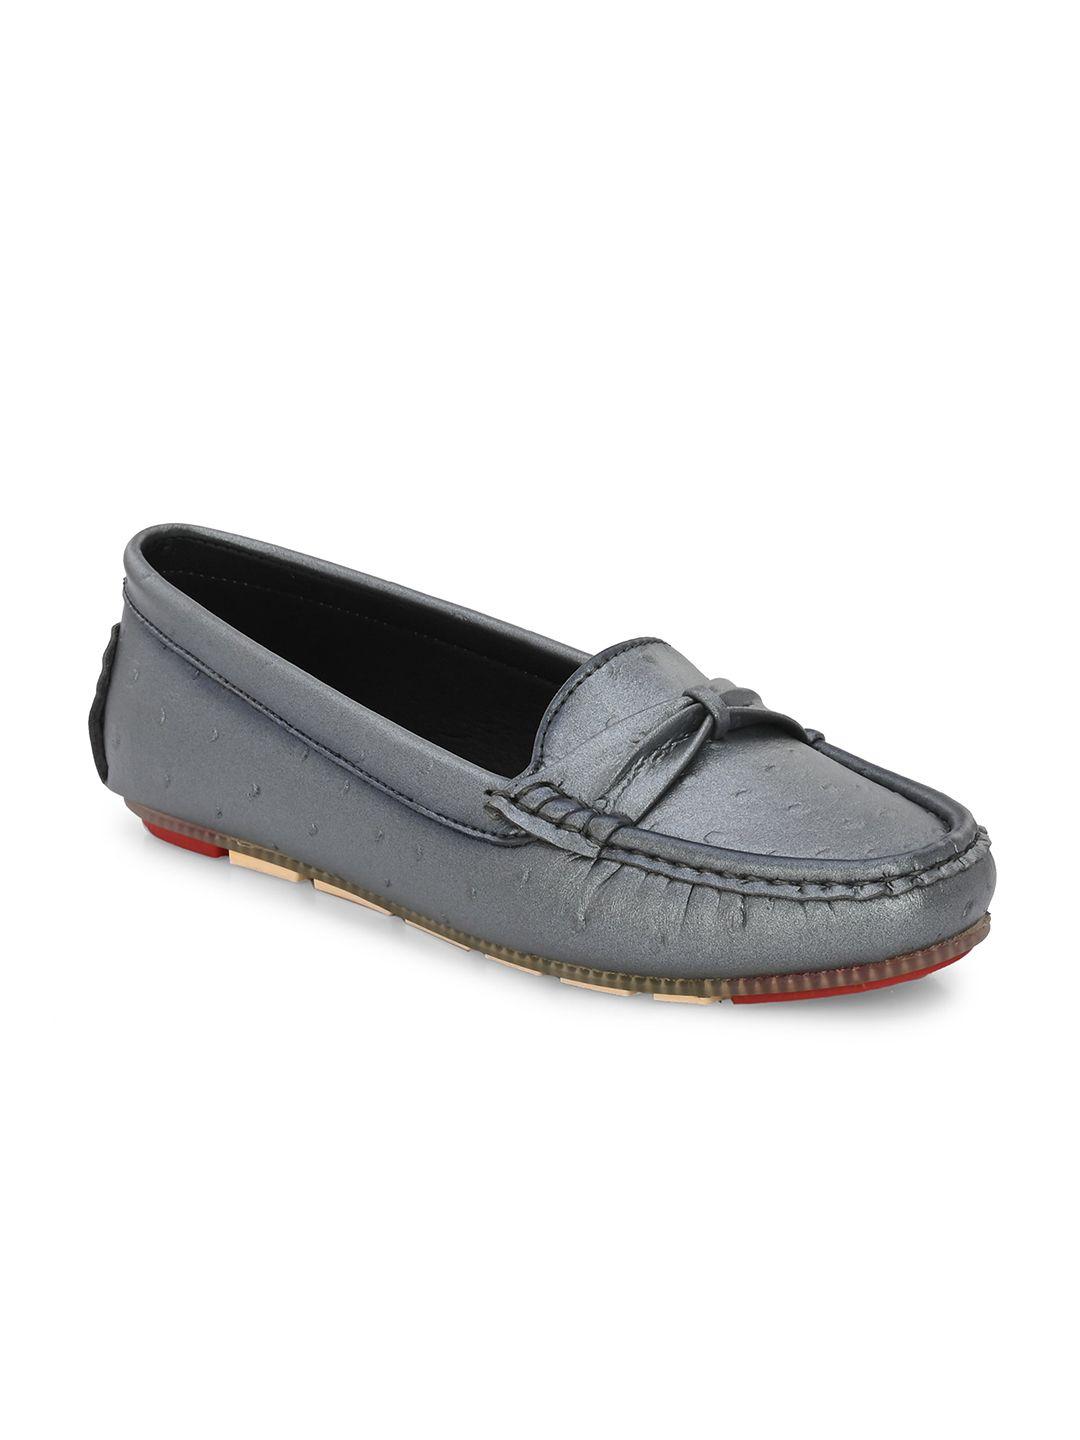 mast & harbour women silver-toned massage footbed memory foam penny loafers